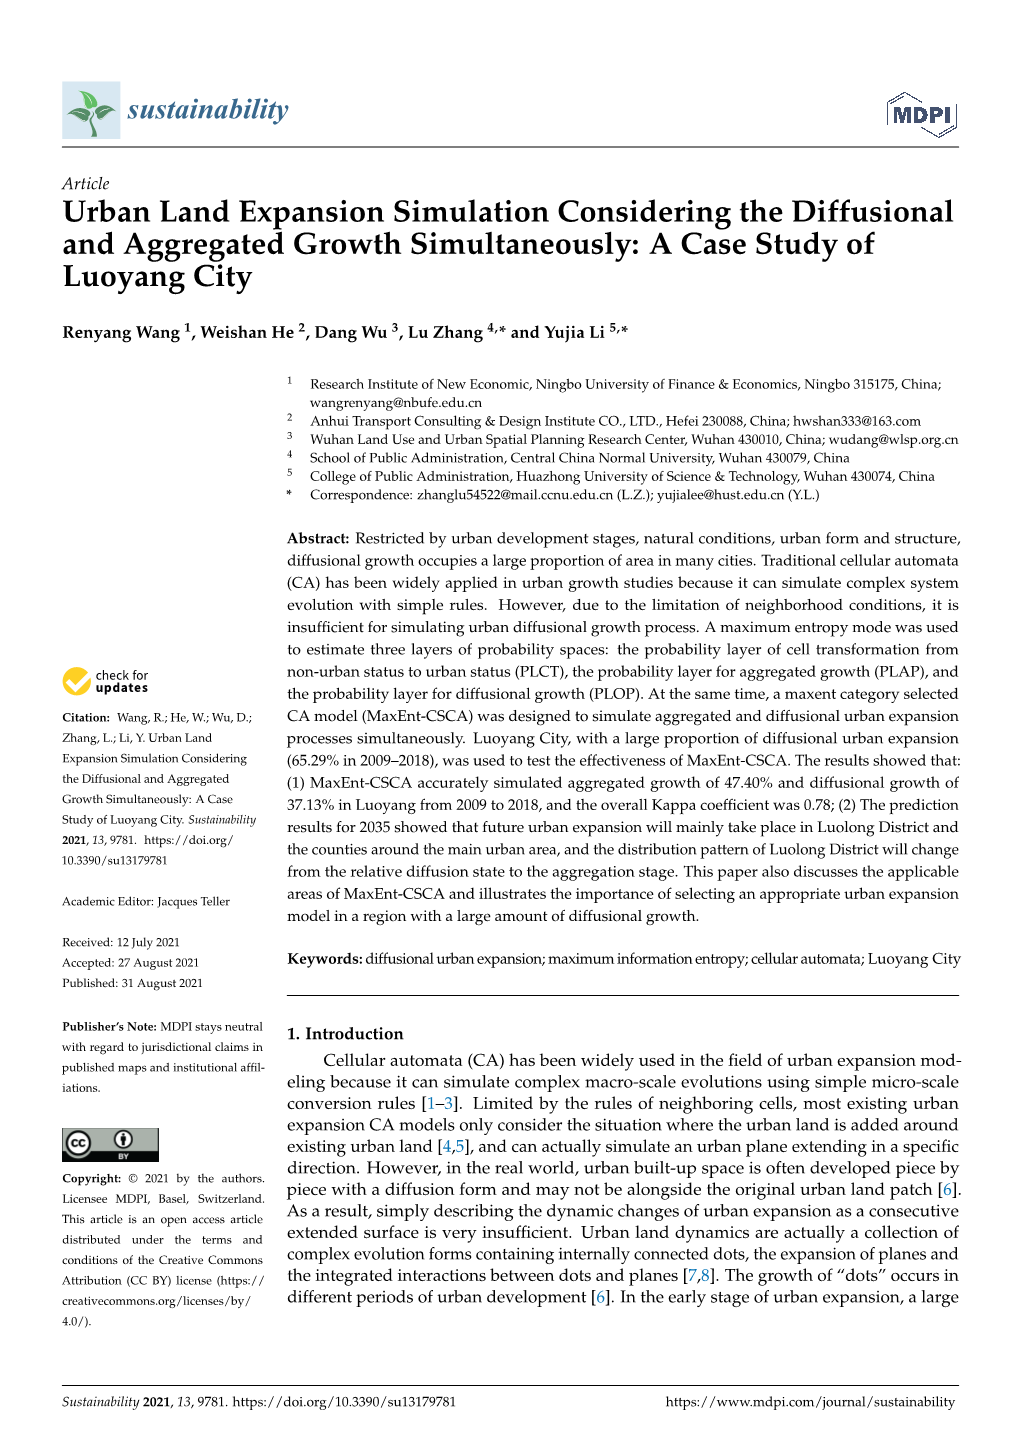 Urban Land Expansion Simulation Considering the Diffusional and Aggregated Growth Simultaneously: a Case Study of Luoyang City